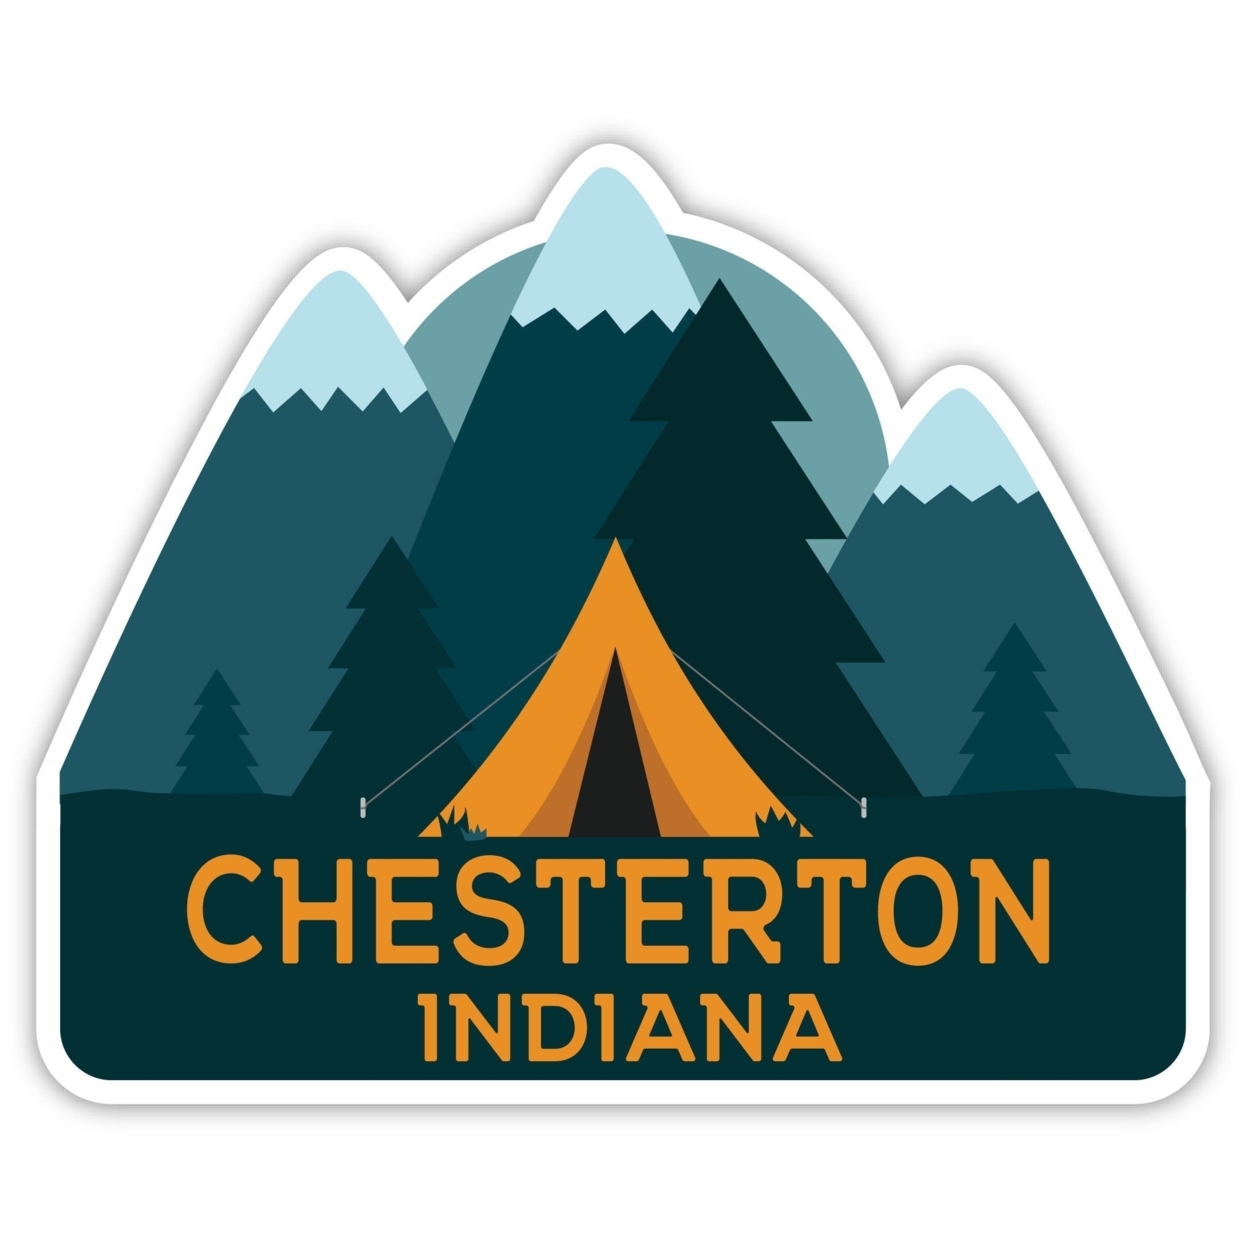 Chesterton Indiana Souvenir Decorative Stickers (Choose Theme And Size) - 4-Pack, 4-Inch, Bear